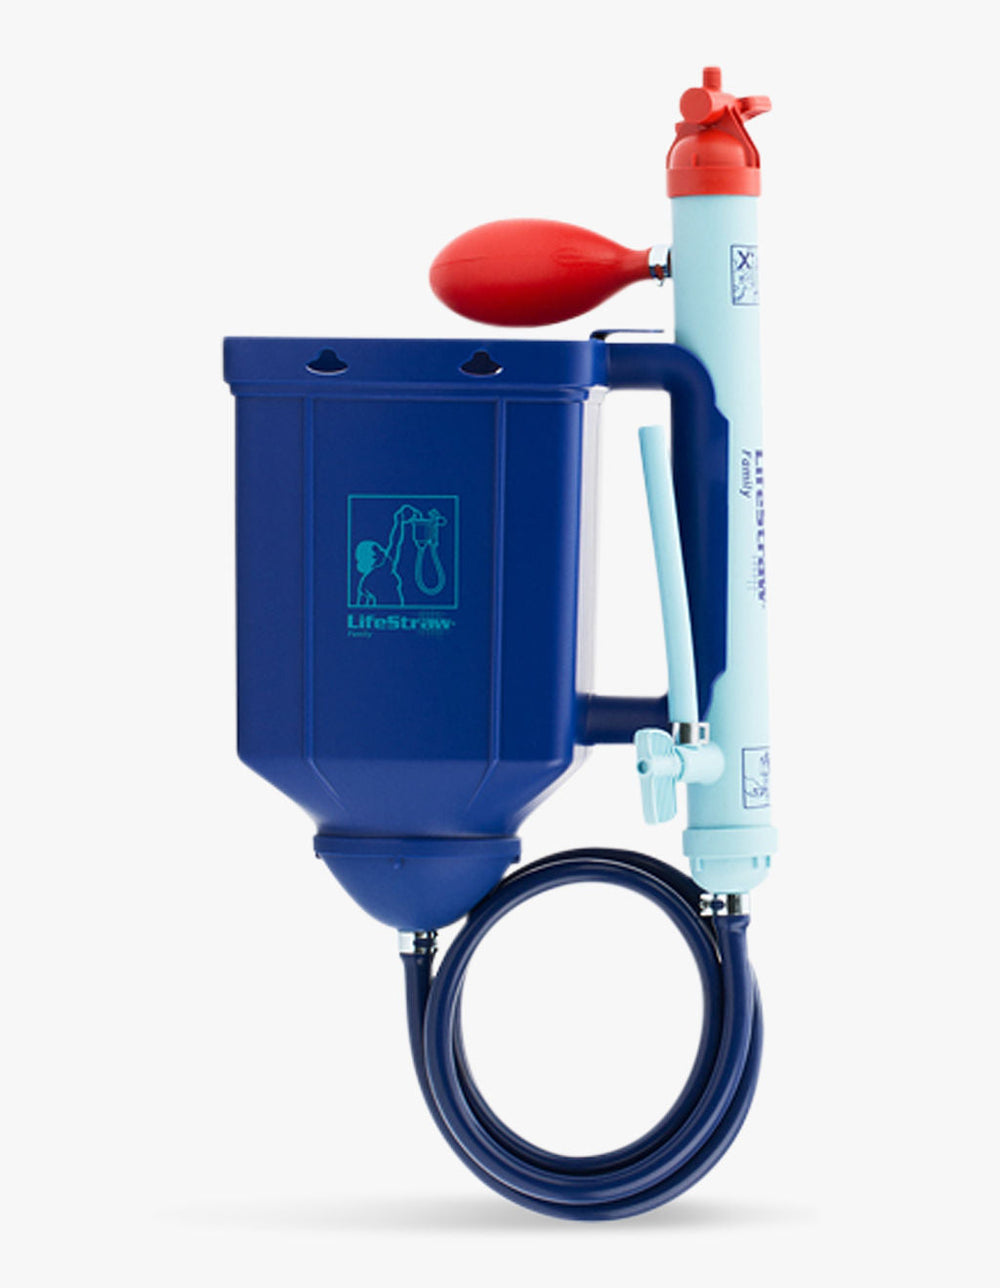 LifeStraw Delivers Clean Drinking Water to Children in Developing